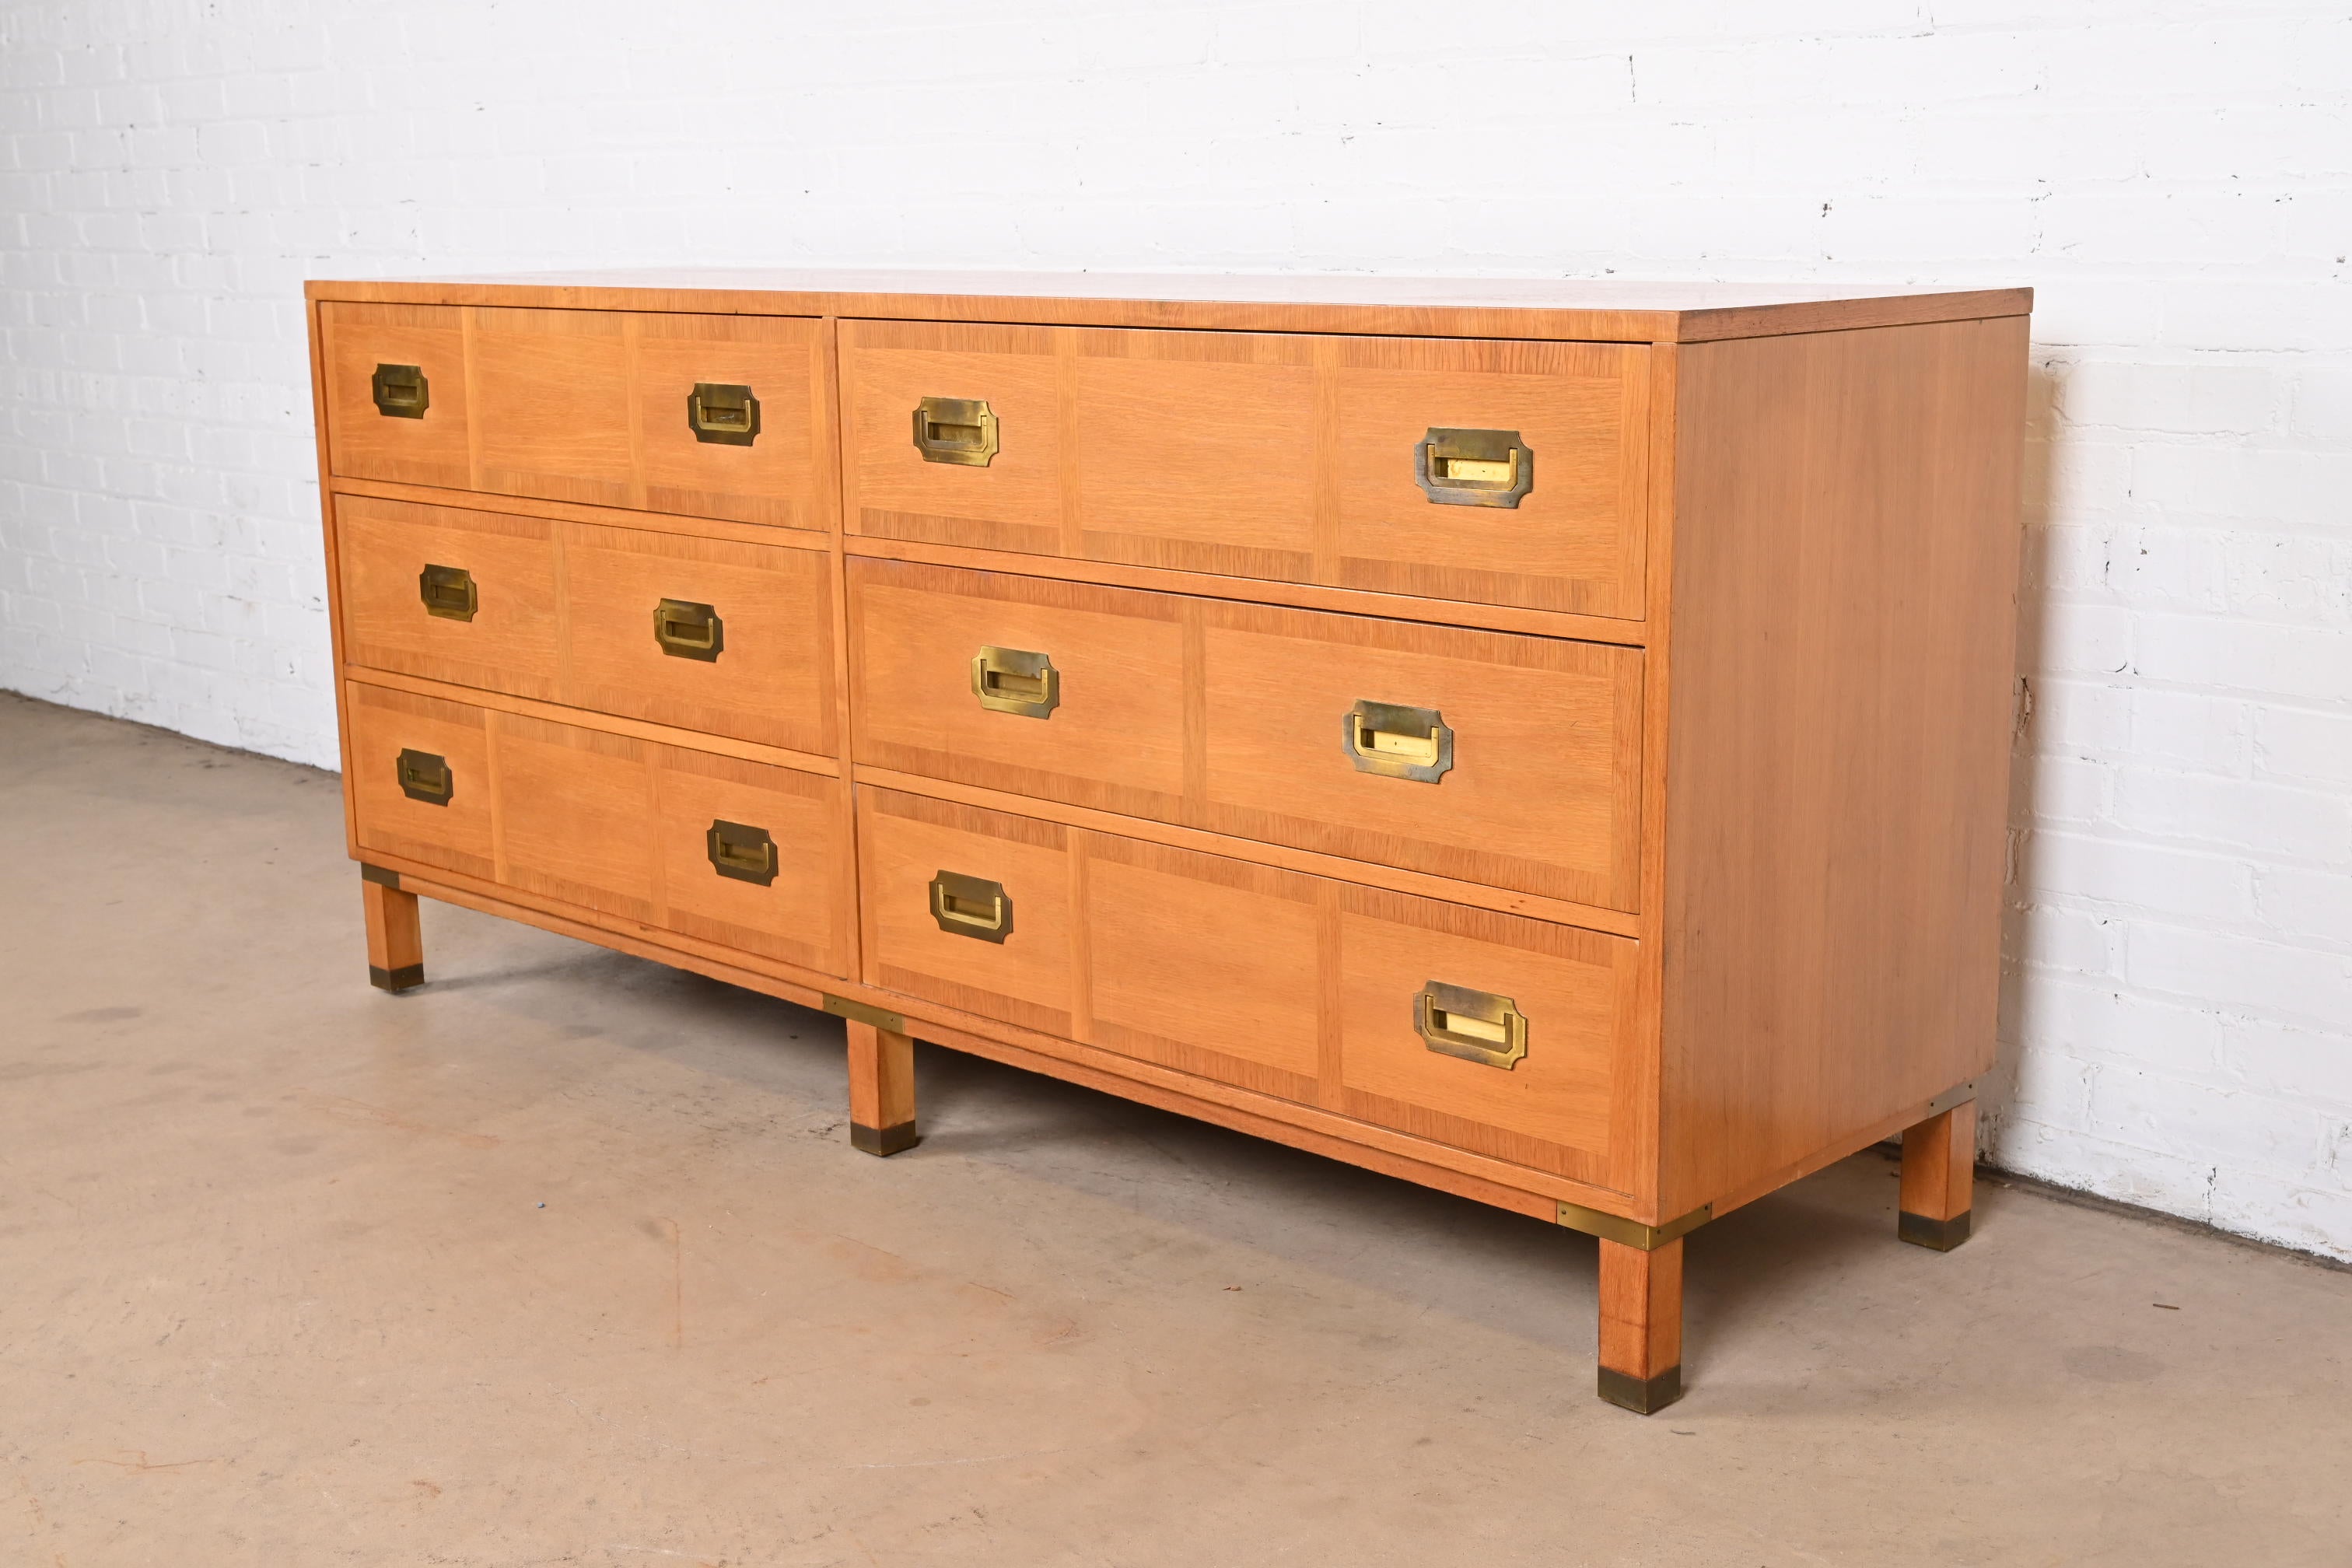 An exceptional mid-century modern Hollywood Regency Campaign style six-drawer dresser or credenza

Produced by Grand Rapids Chair Co. for Baker Furniture, 